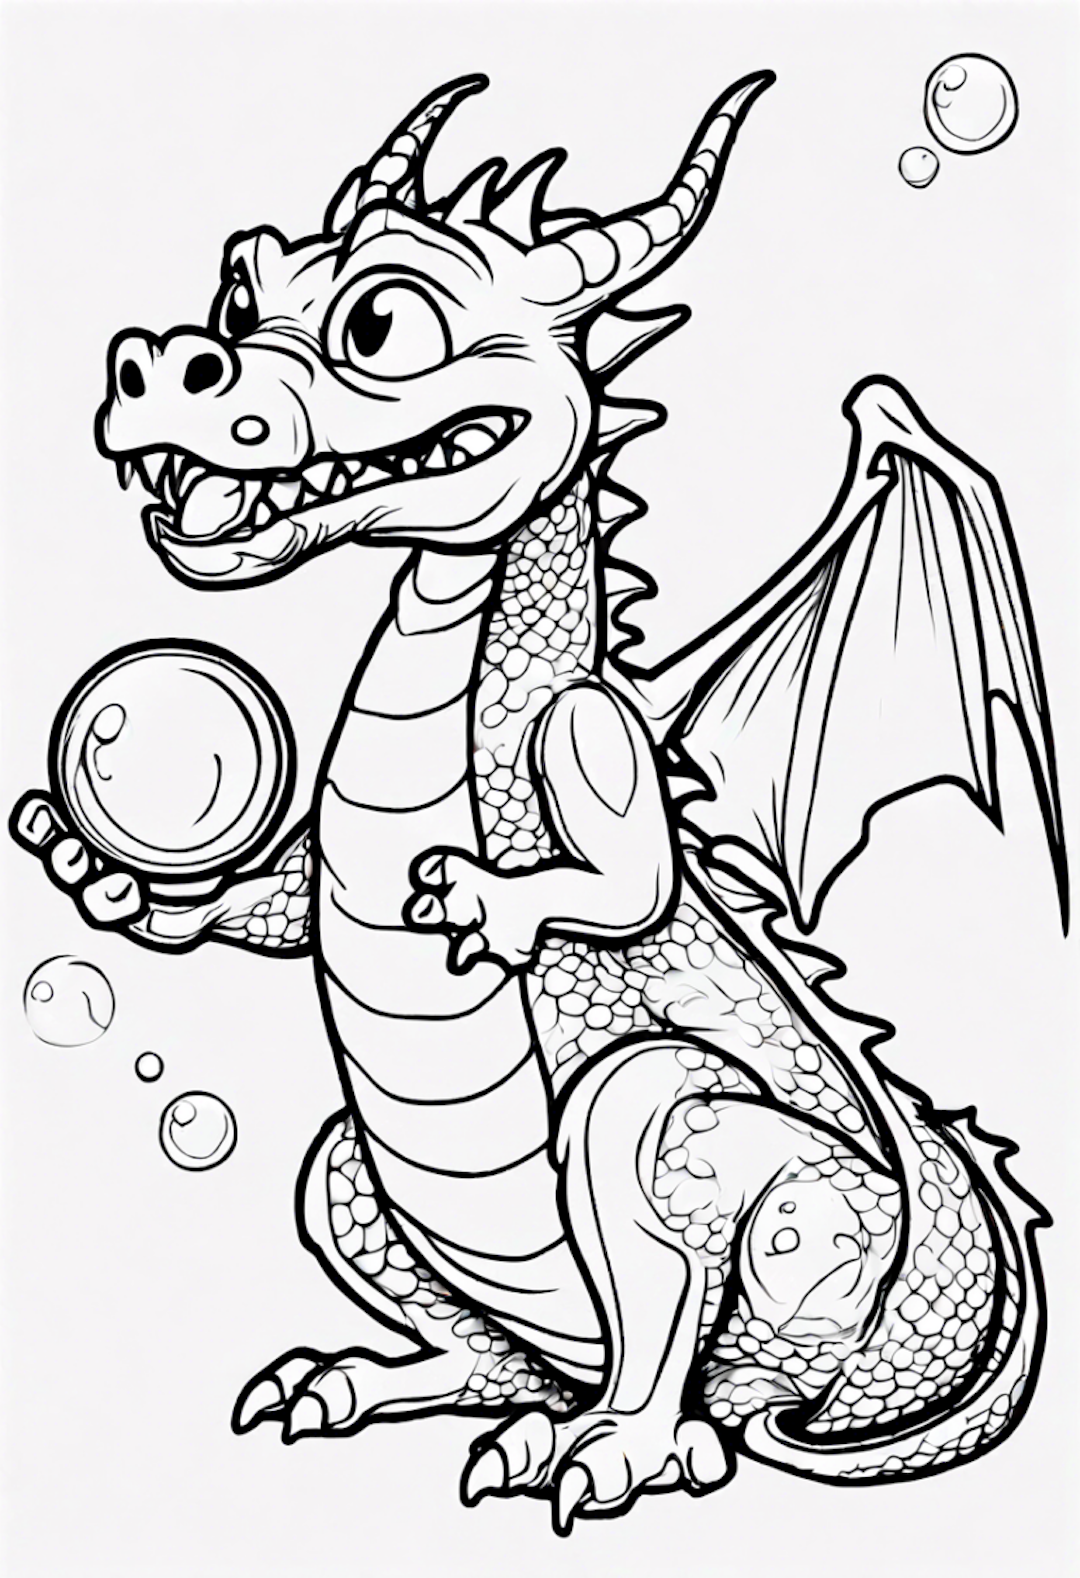 Playful Dragon Blowing Bubbles coloring pages